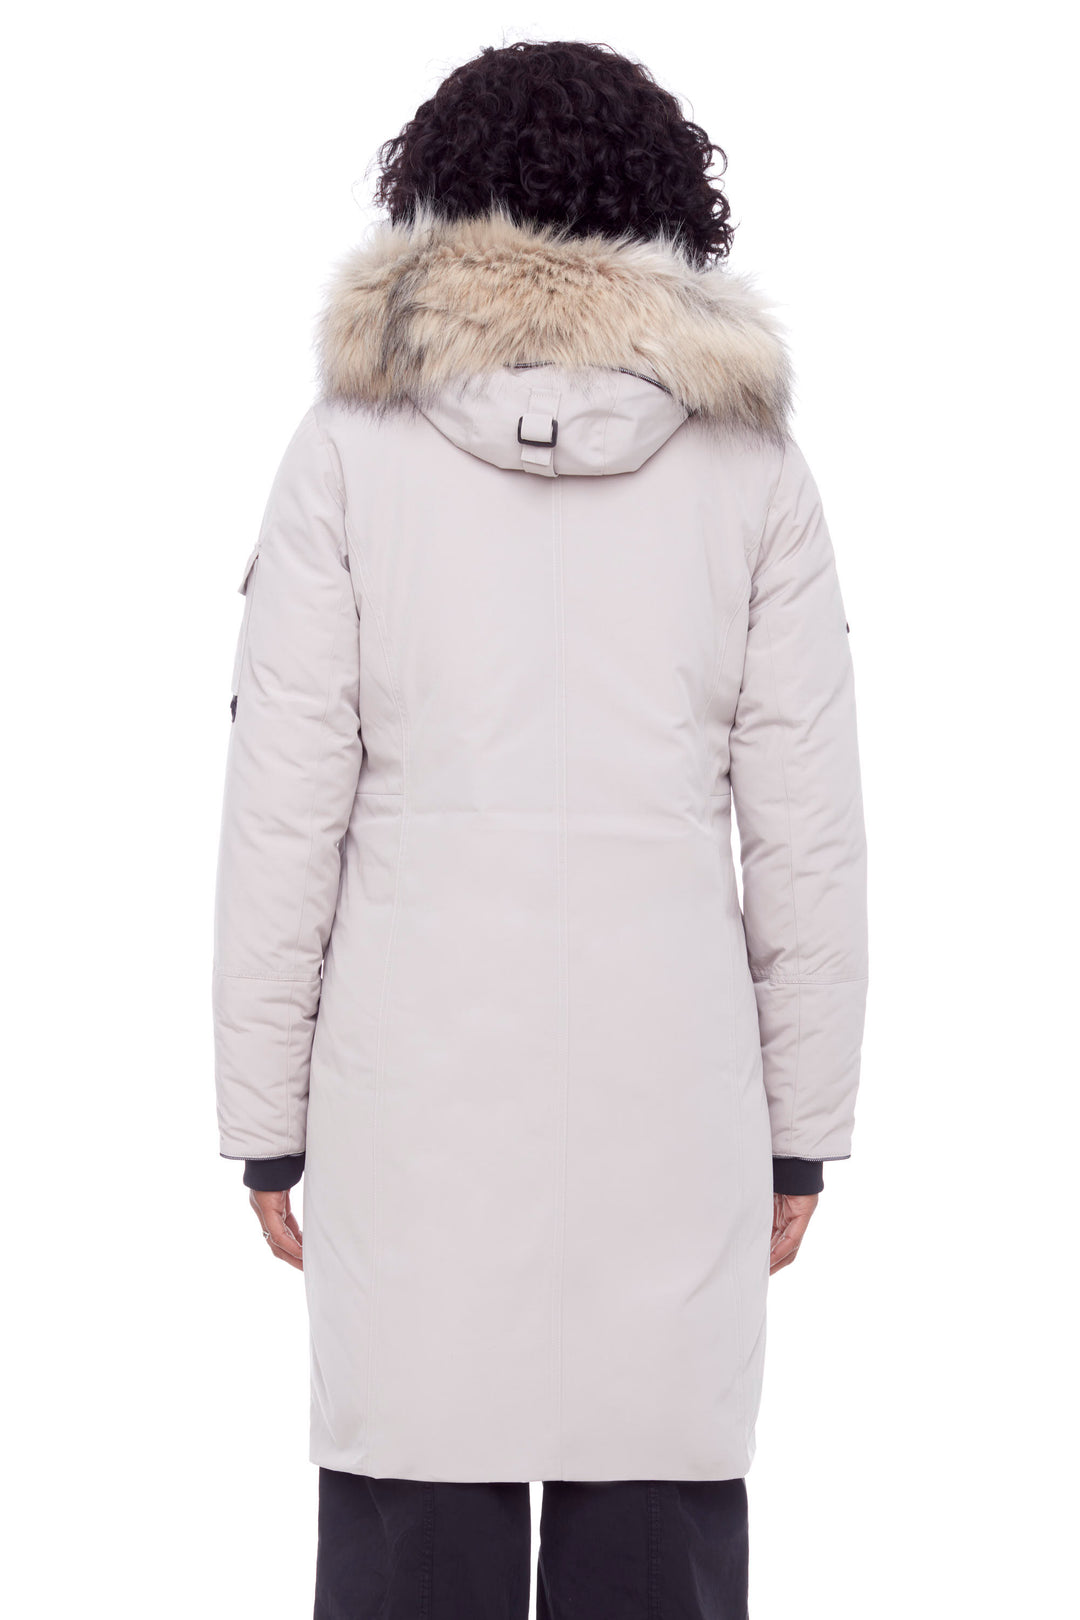 LAURENTIAN | WOMEN'S VEGAN DOWN (RECYCLED) LONG PARKA, TAUPE